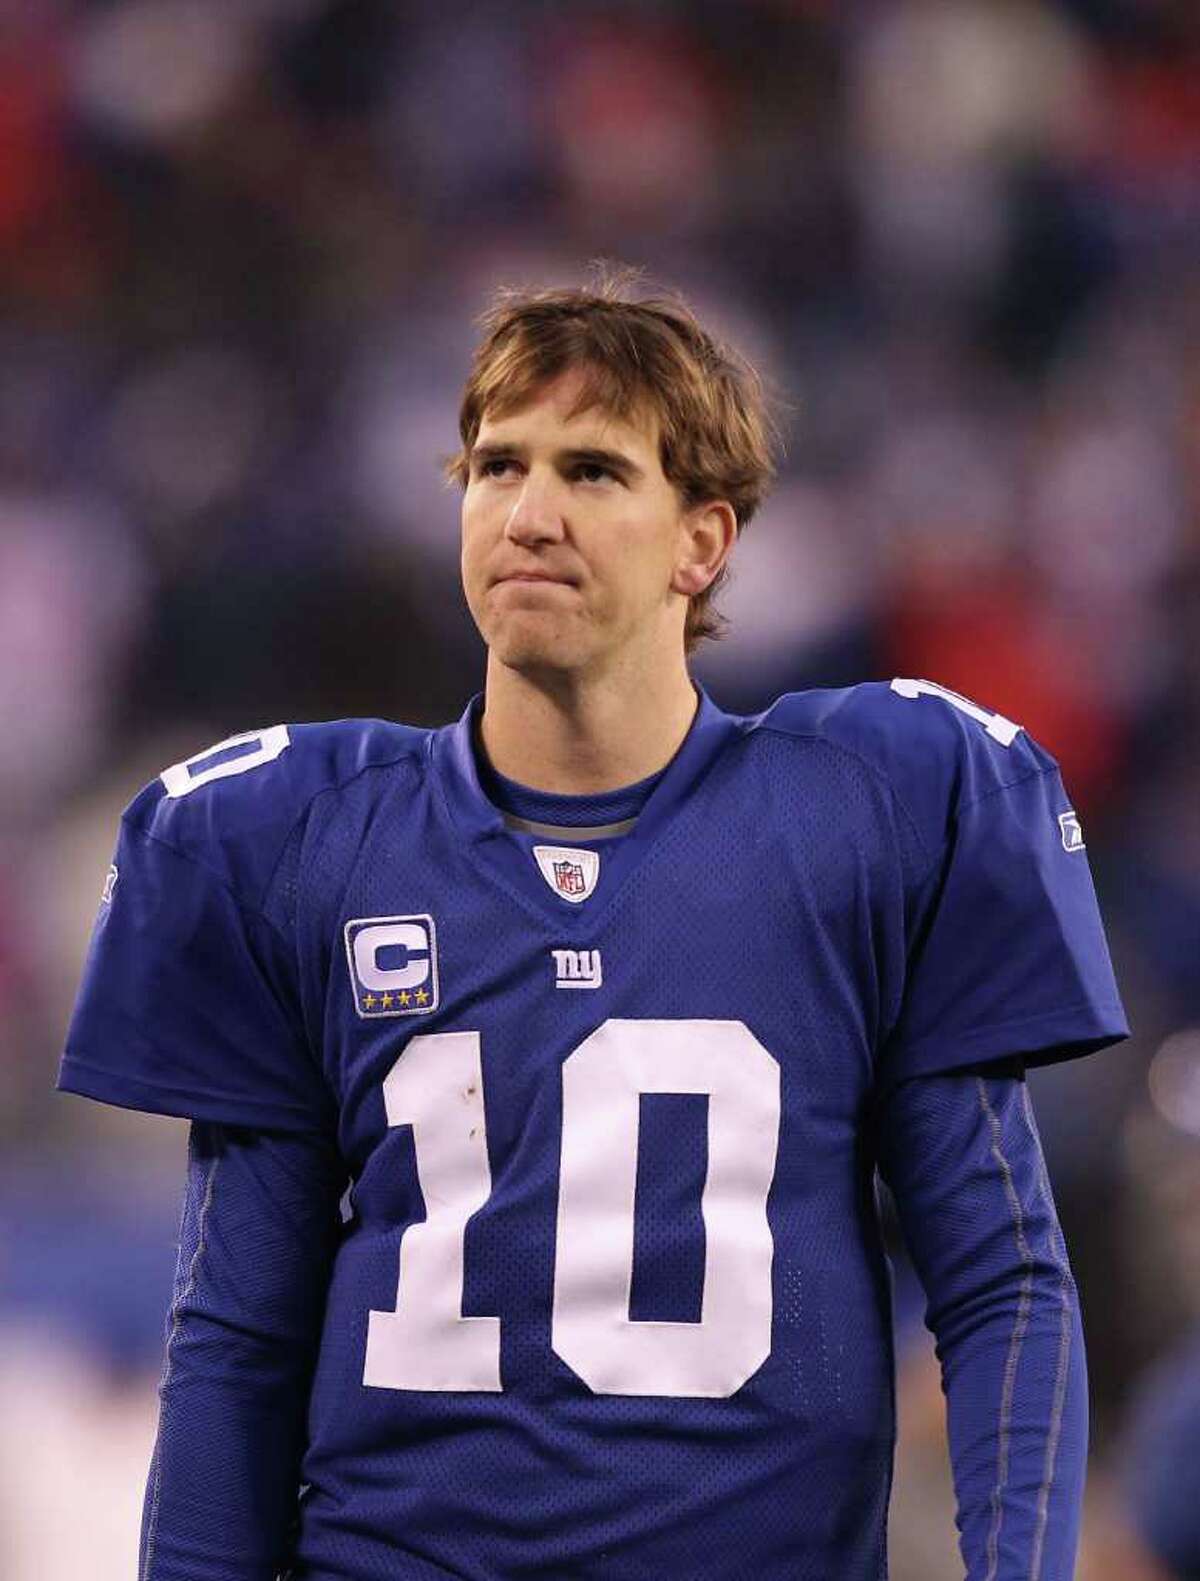 EAST RUTHERFORD, NJ - DECEMBER 19: Eli Manning #10 of the New York Giants walks off the field dejected after losing to the Philadelphia Eagles 38-31 on December 19, 2010 at The New Meadowlands Stadium in East Rutherford, New Jersey. (Photo by Al Bello/Getty Images) *** Local Caption *** Eli Manning